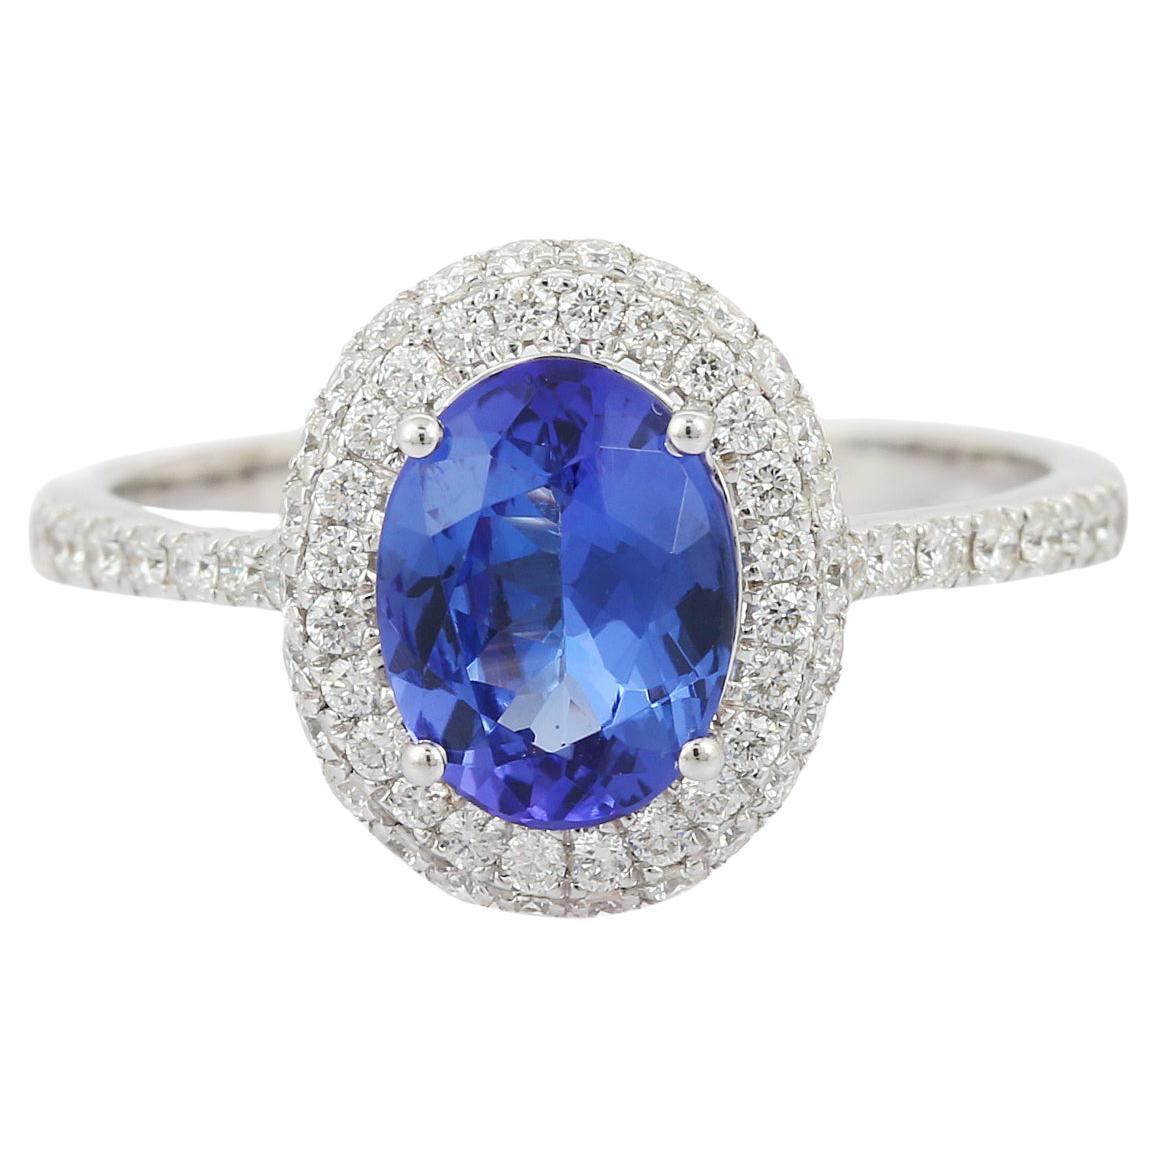 For Sale:  Statement 18 Karat Solid White Gold Tanzanite Ring with Diamonds